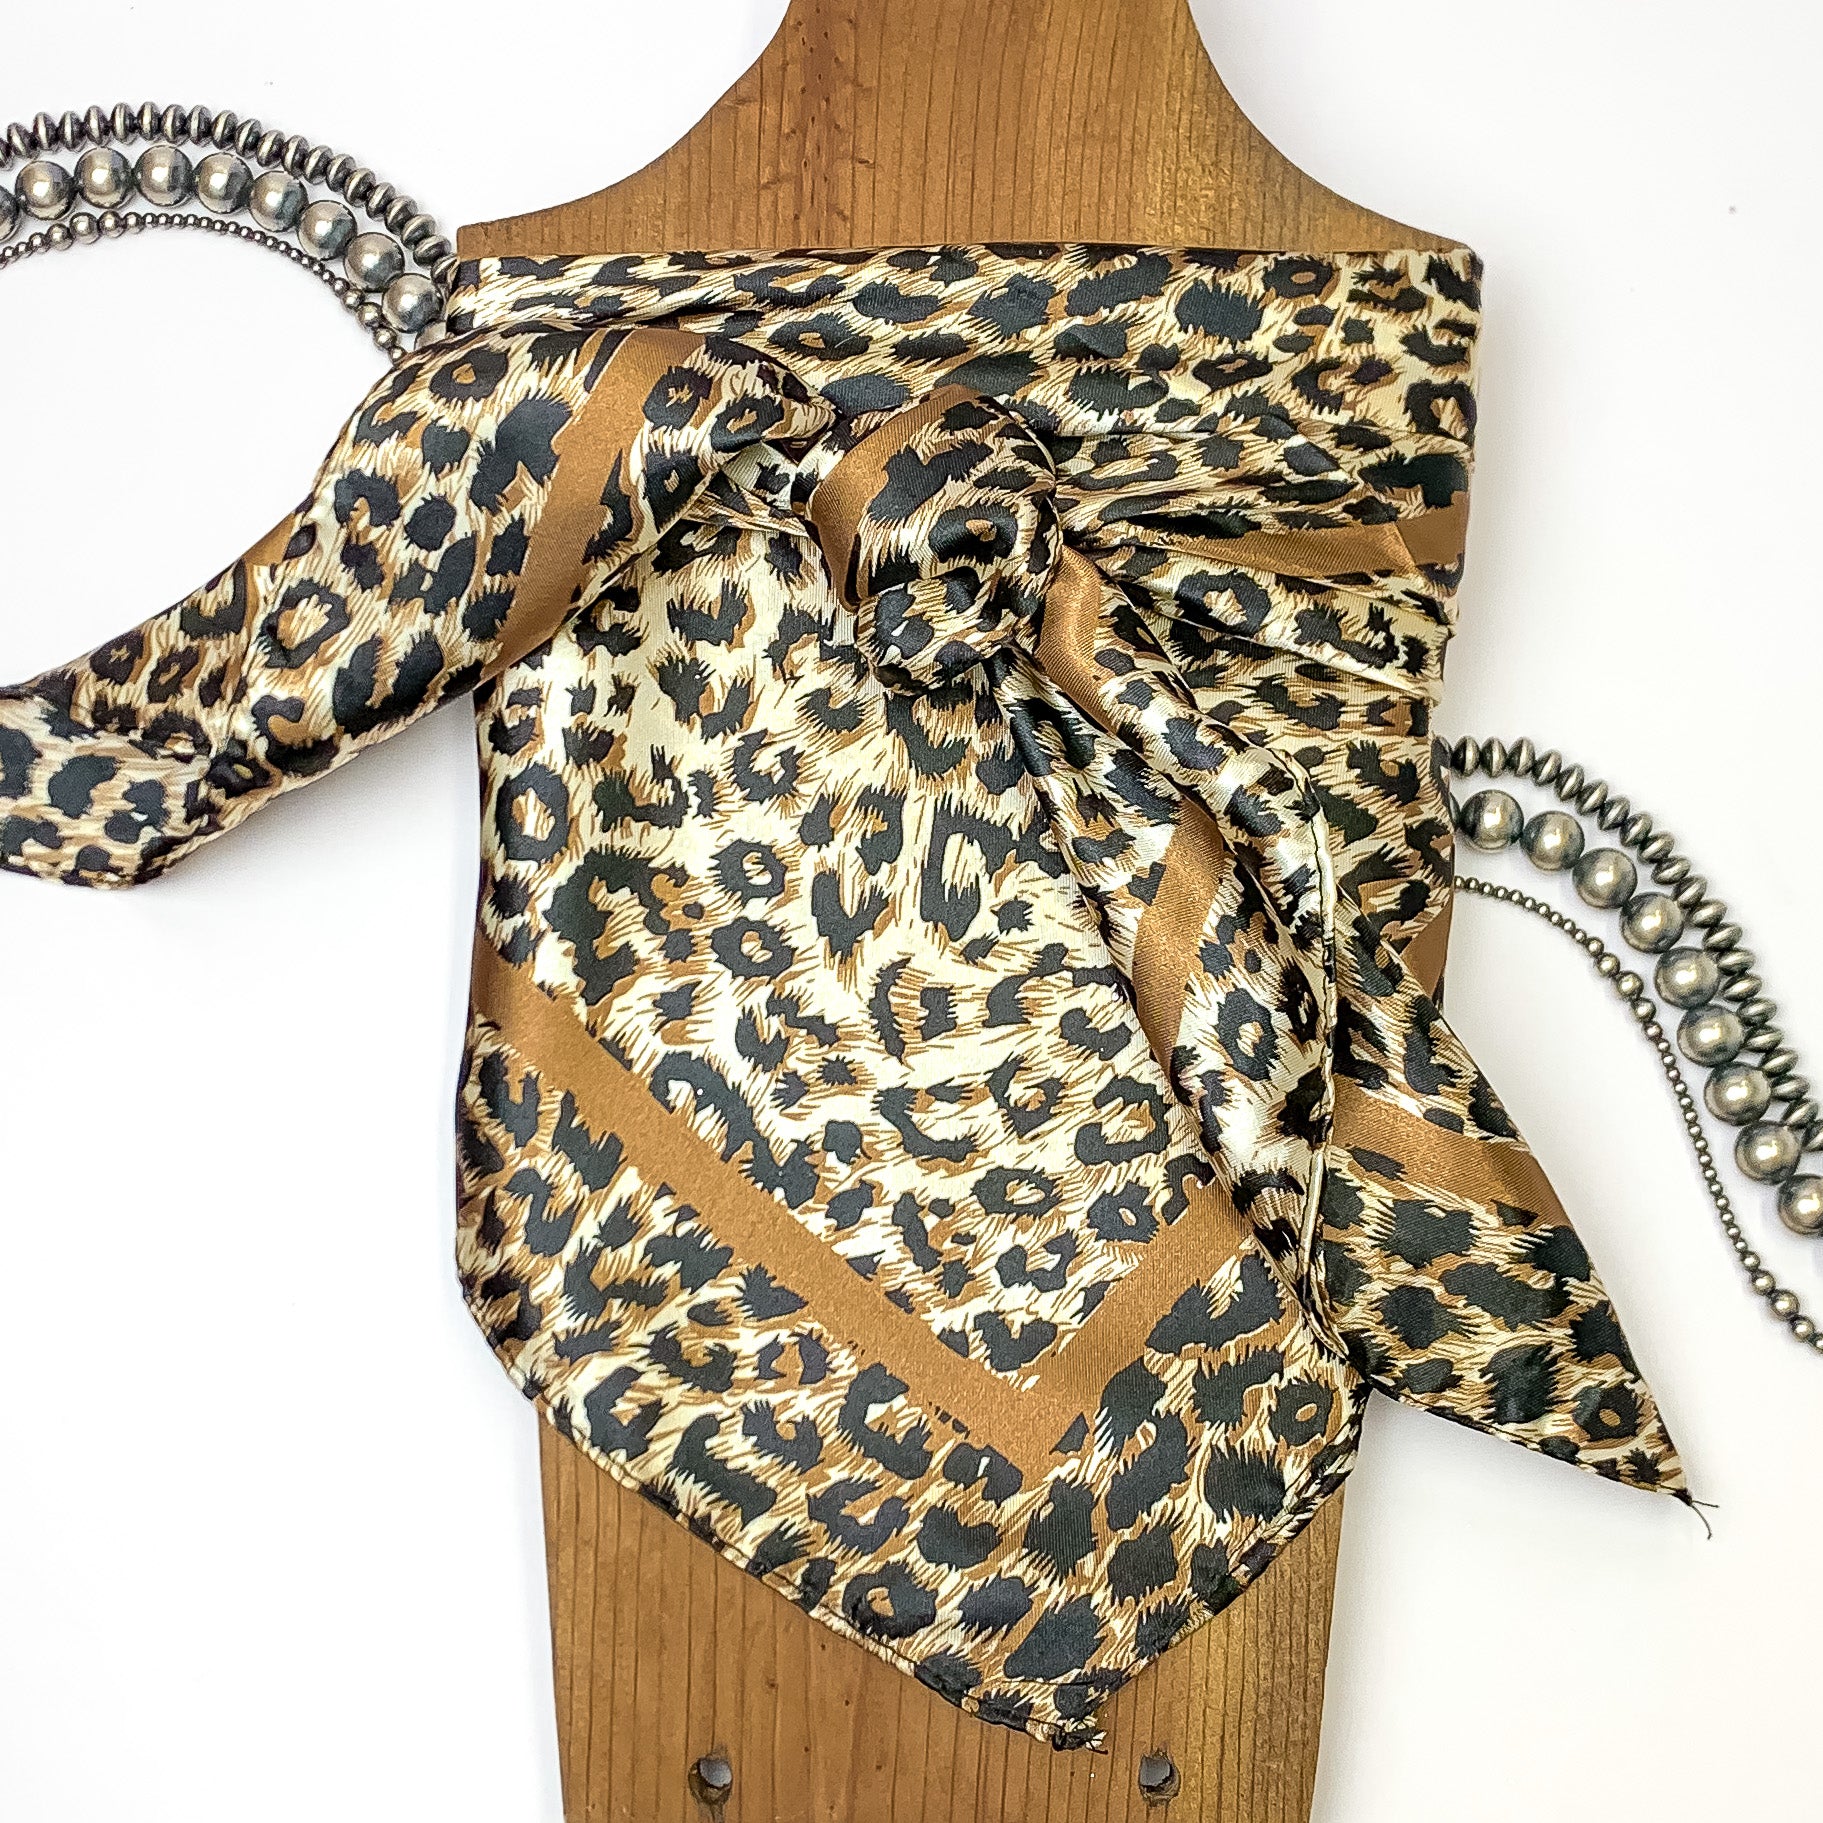 Leopard print scarf tied around a wooden necklace holder, pictured on a white background that has silver beads across. 